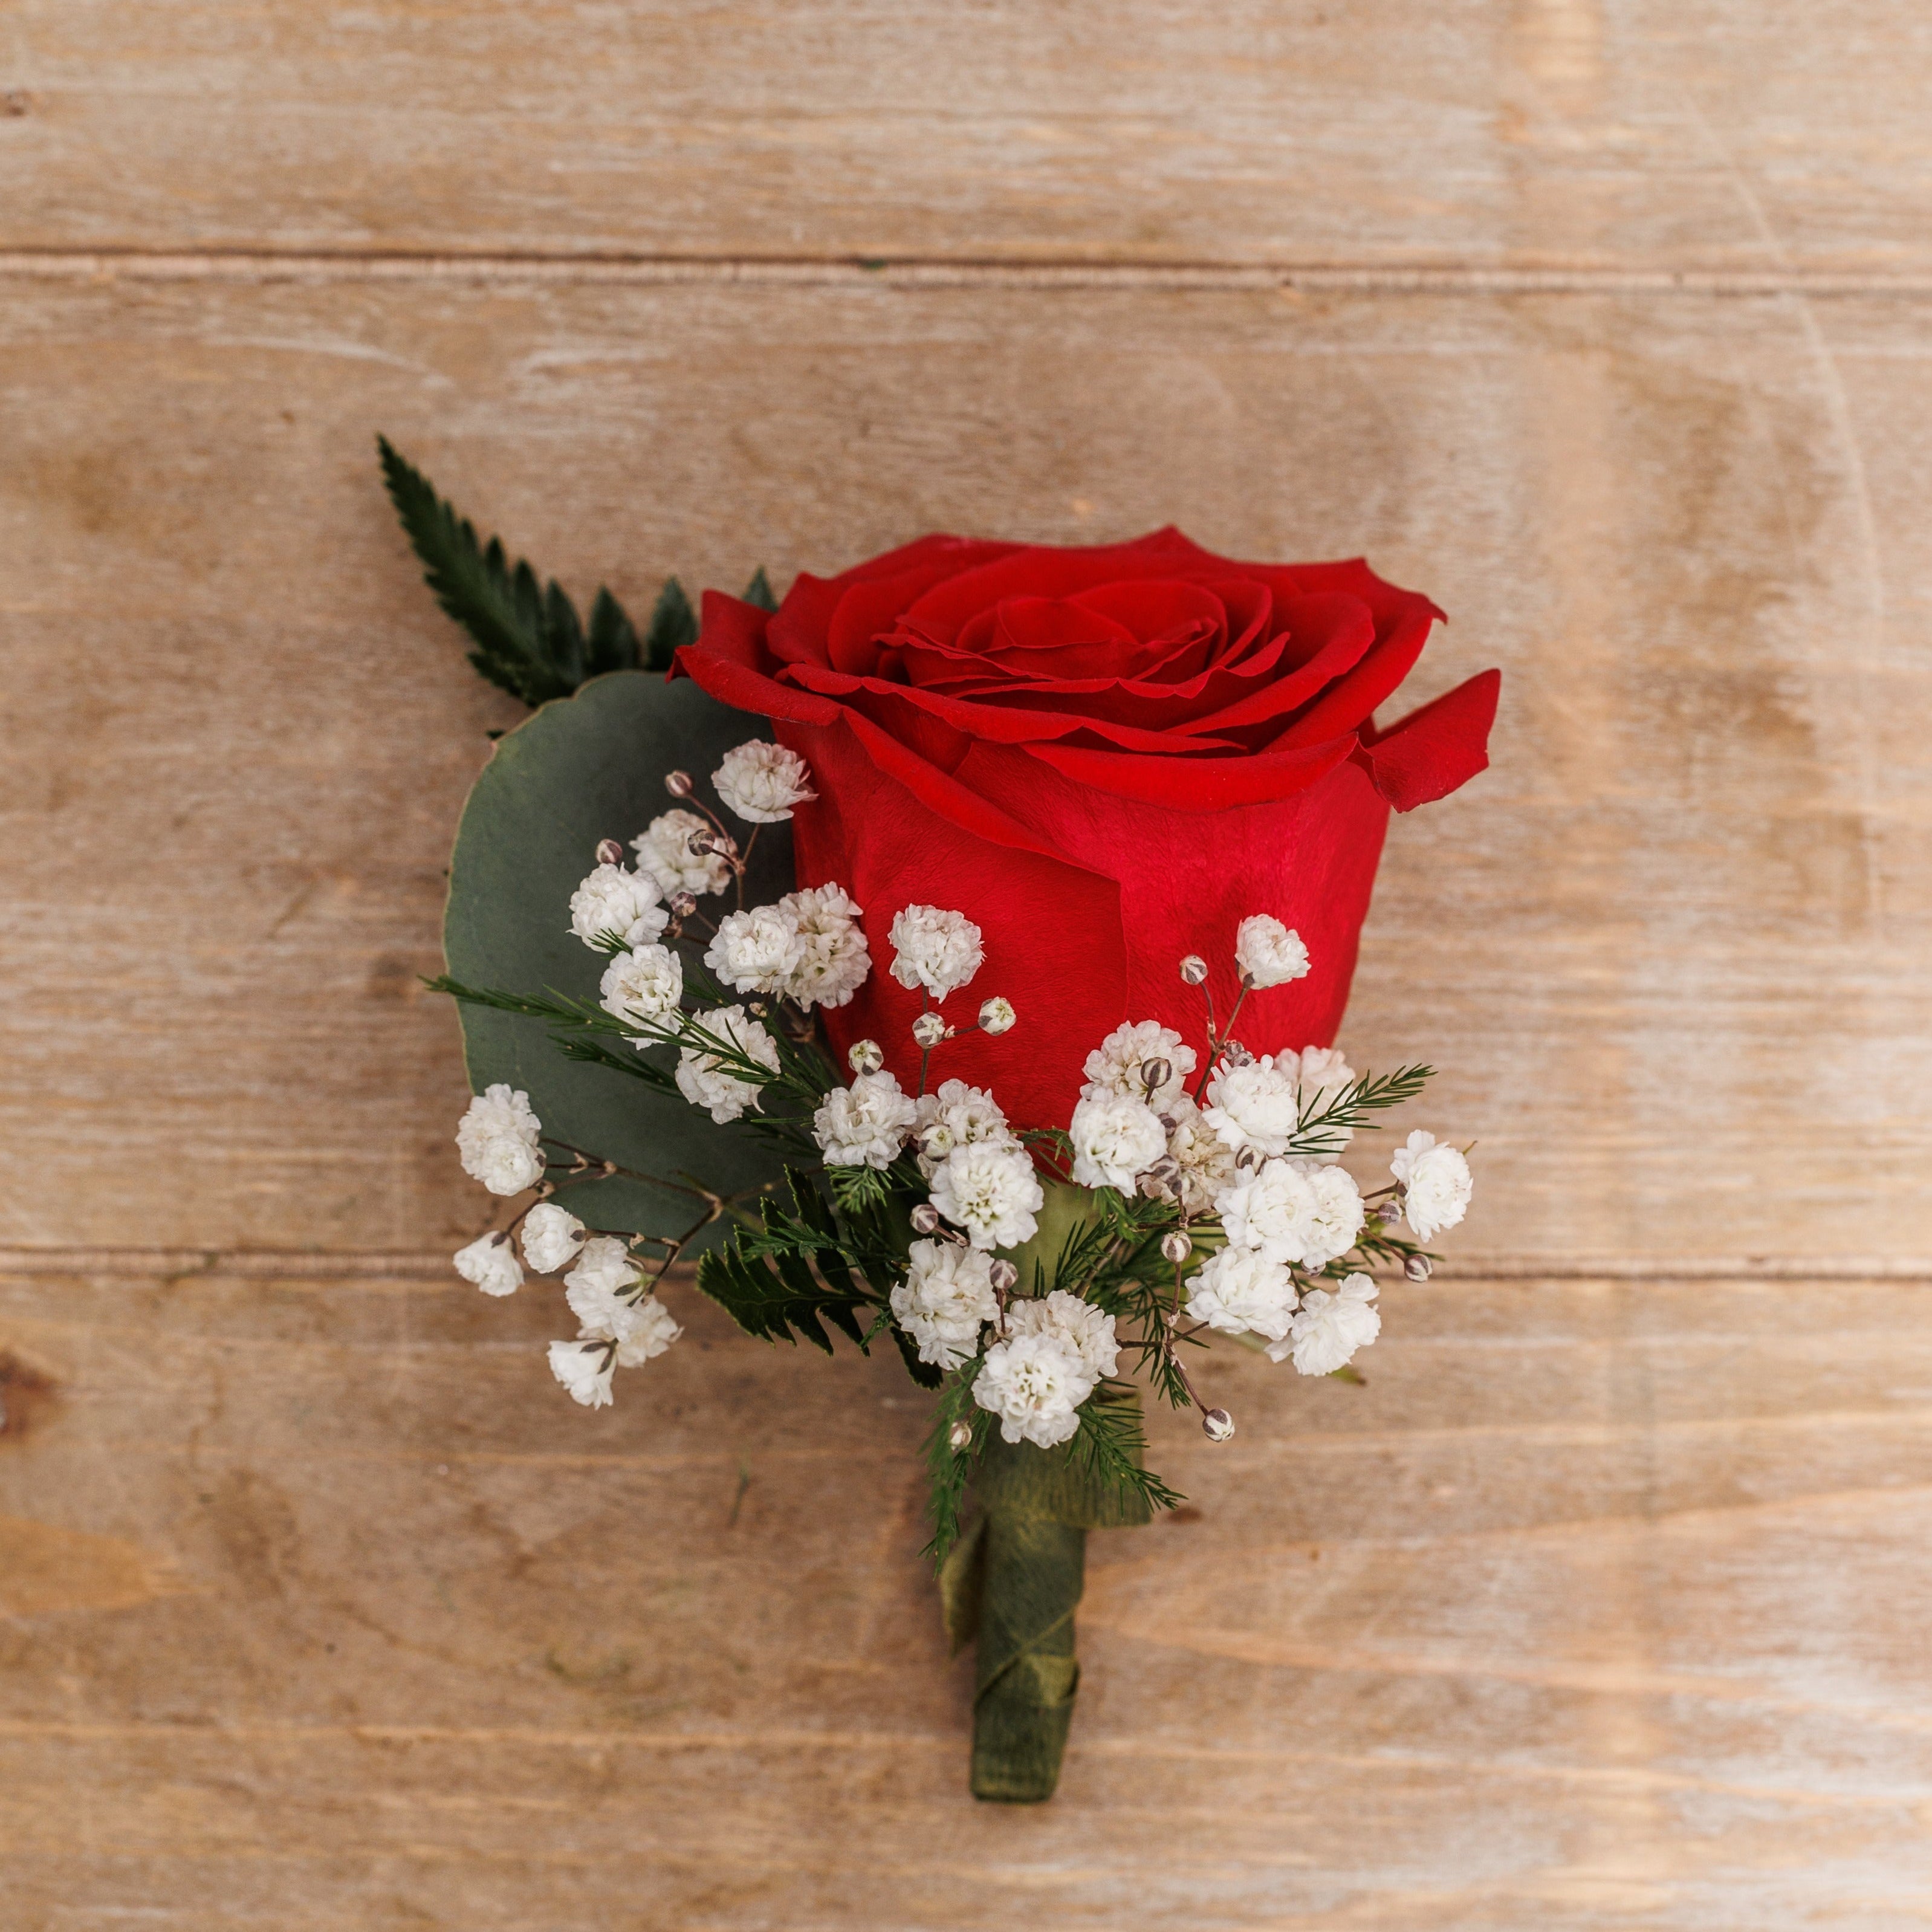 A red rose boutonniere.